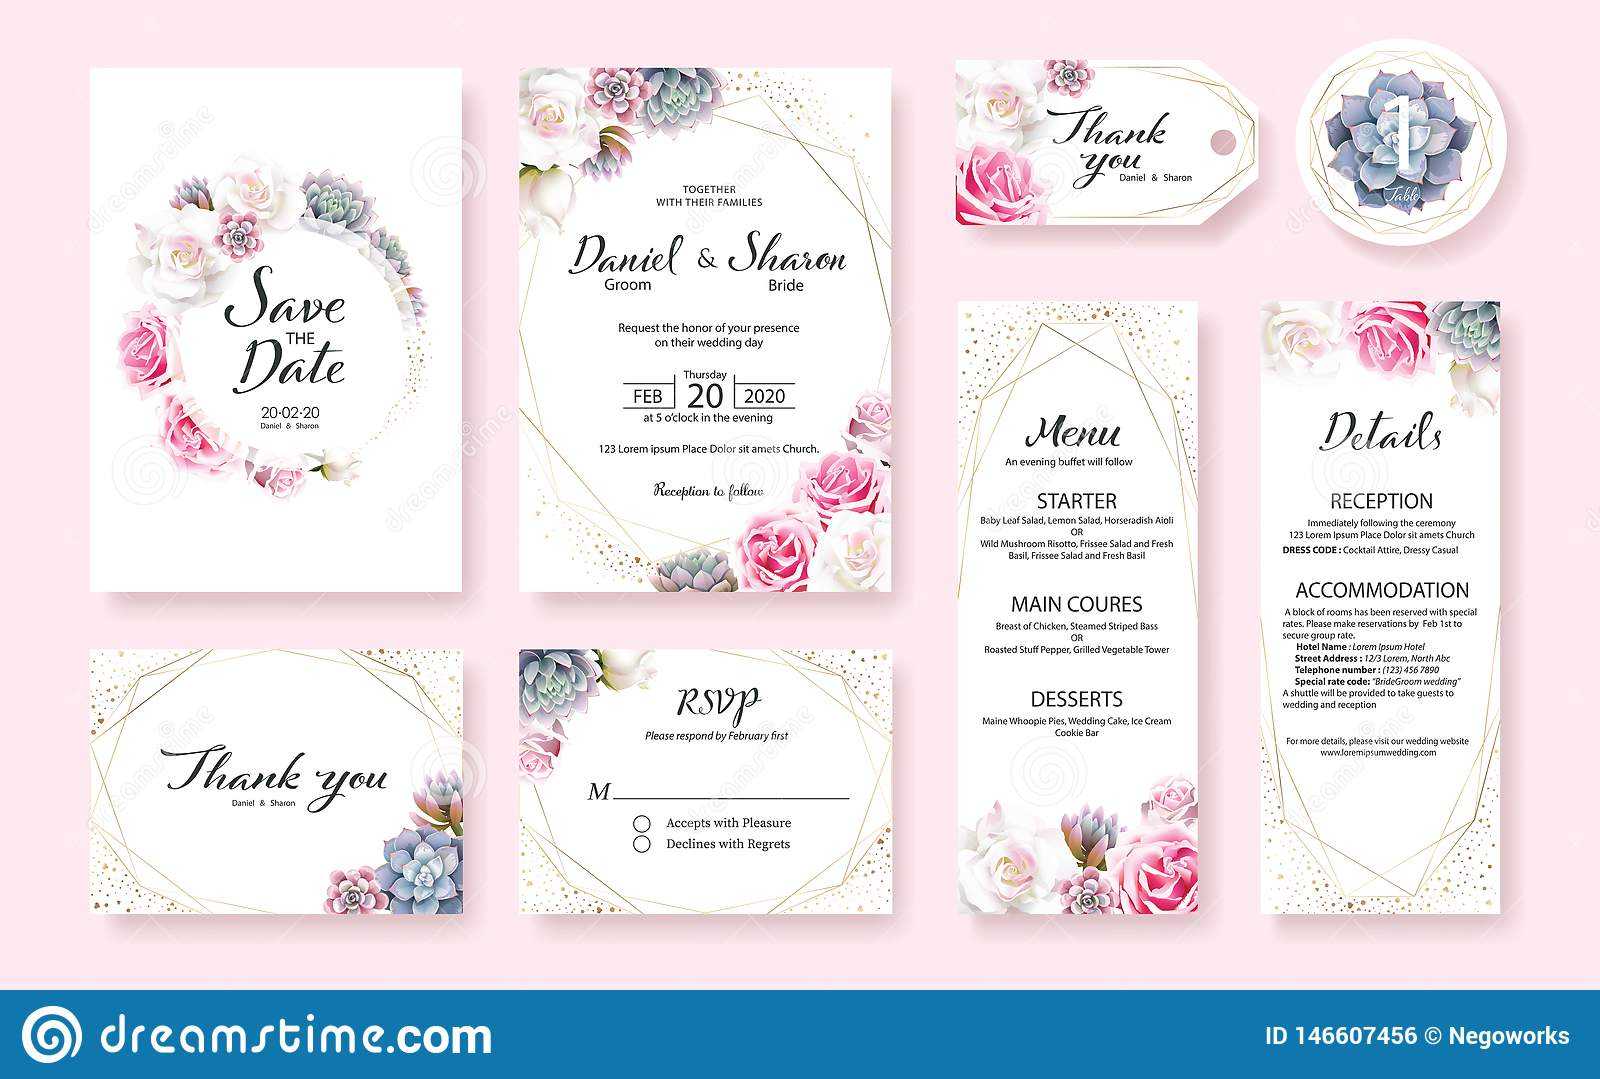 Floral Wedding Invitation Card, Save The Date, Thank You Within Table Reservation Card Template